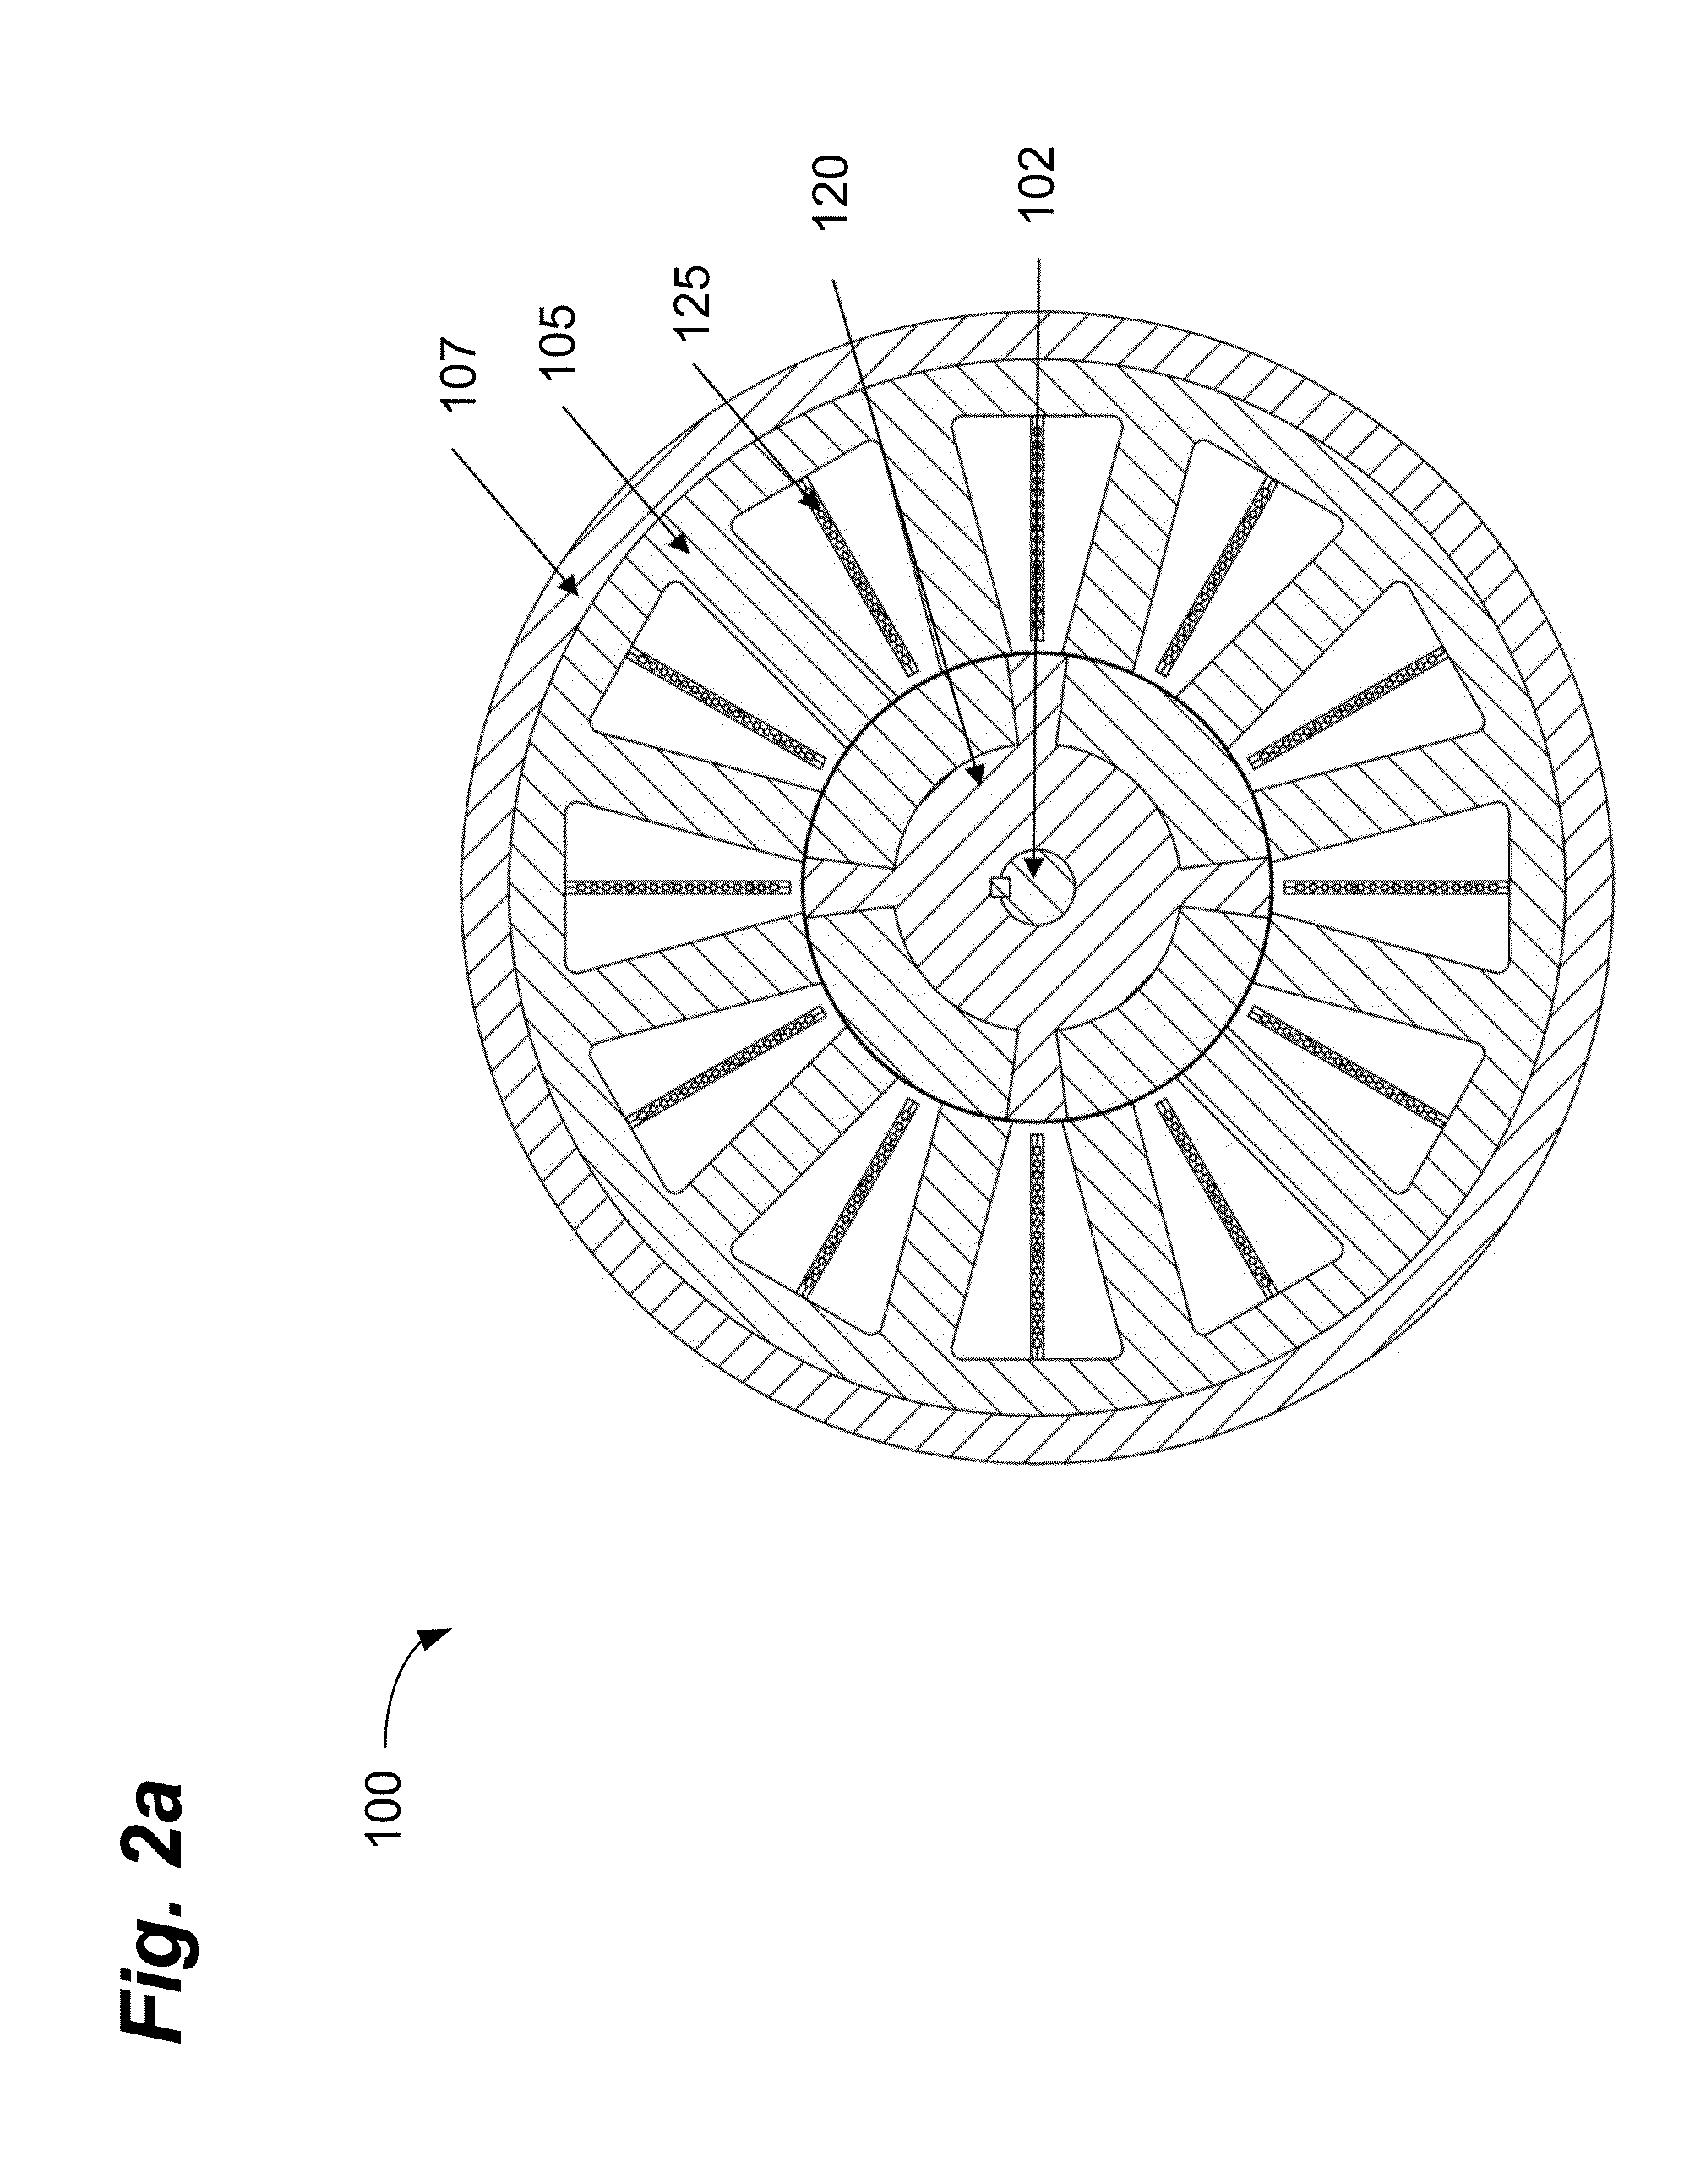 Systems and methods for direct winding cooling of electric machines